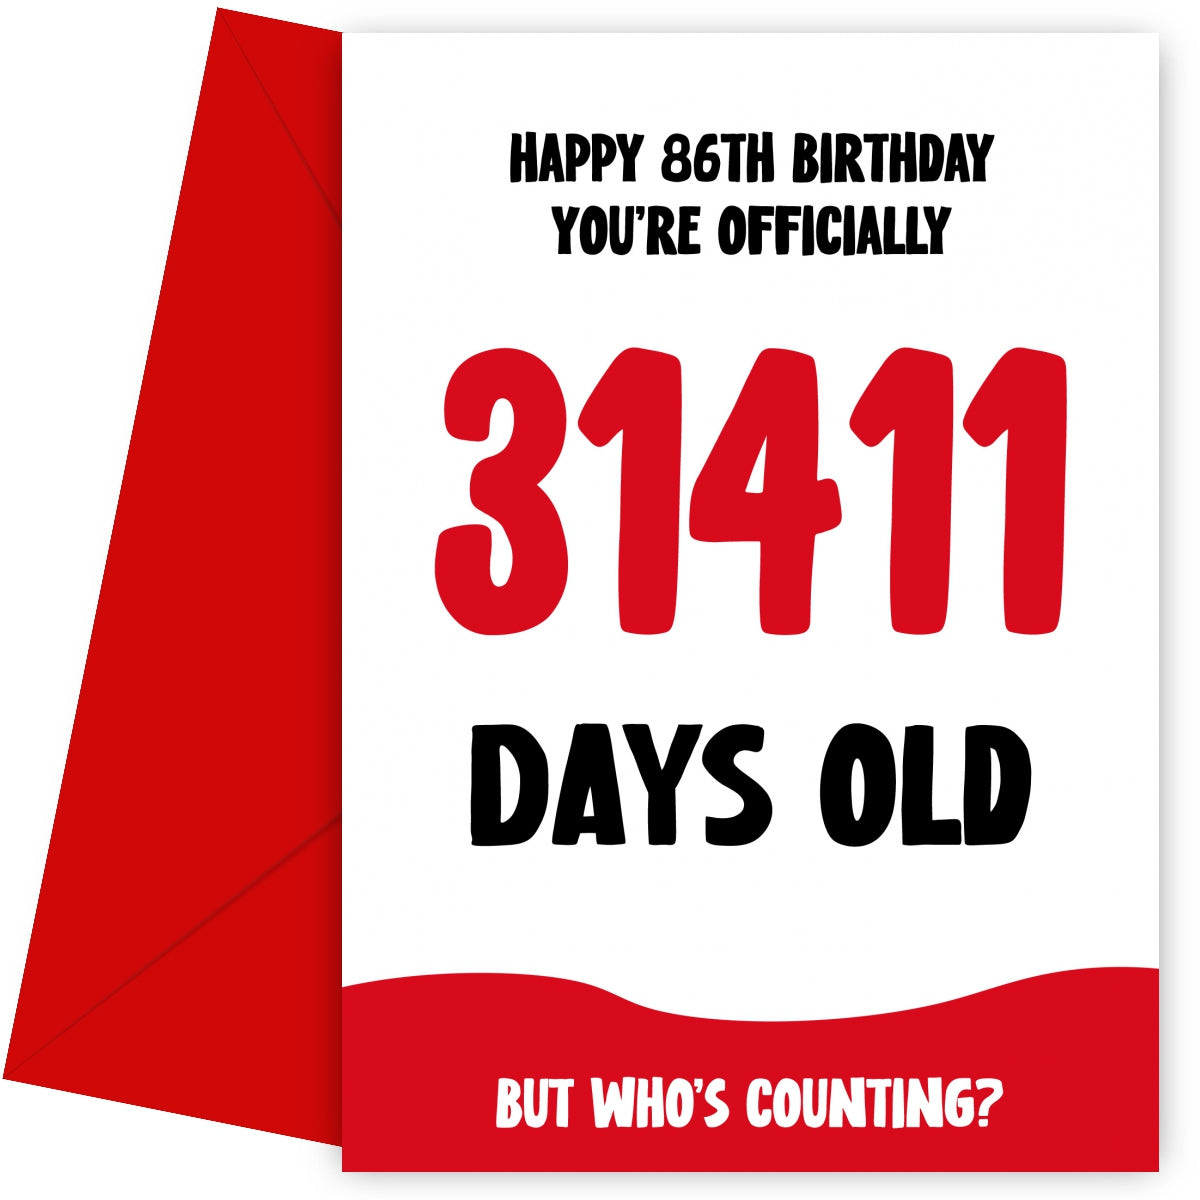 Funny 86th Birthday Card for Men and Women - 31411 Days Old